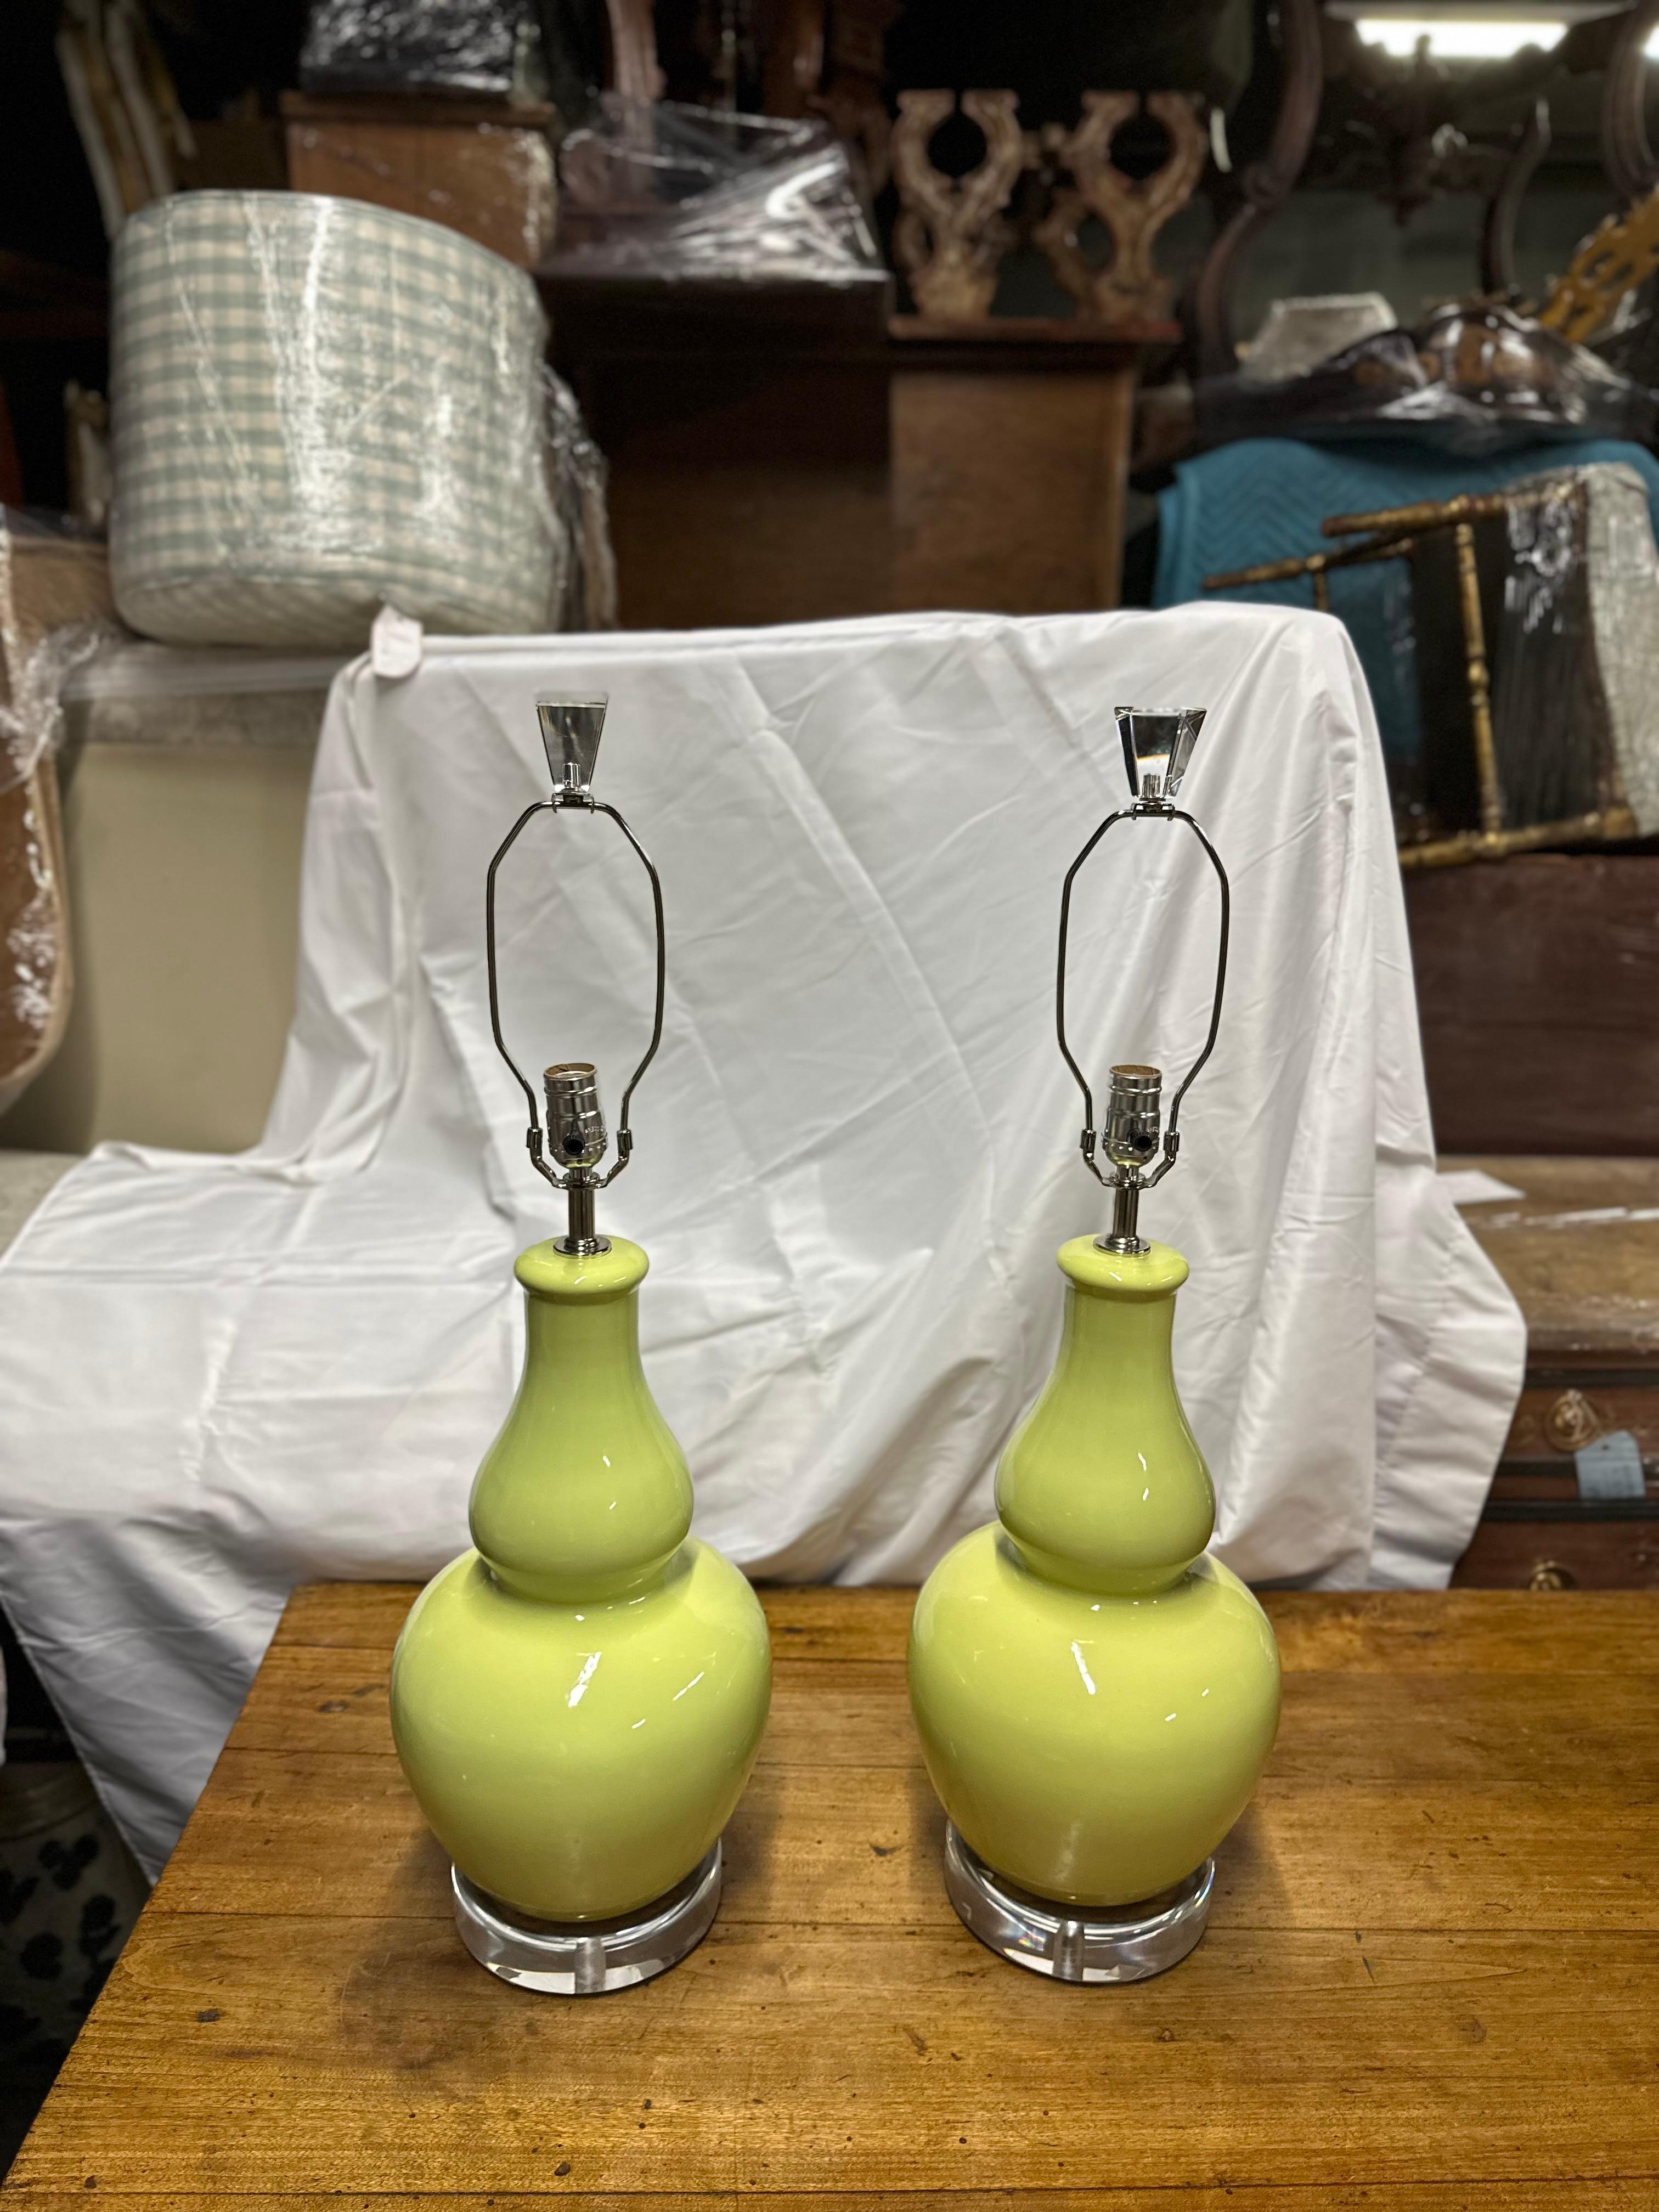 The maker of these lamps are unknown.
This pair of pistachio green ceramic lamps with shades and lucite bases exudes elegance and modern sophistication. The soft, muted hue of pistachio green adds a subtle pop of color to any space, while the glossy